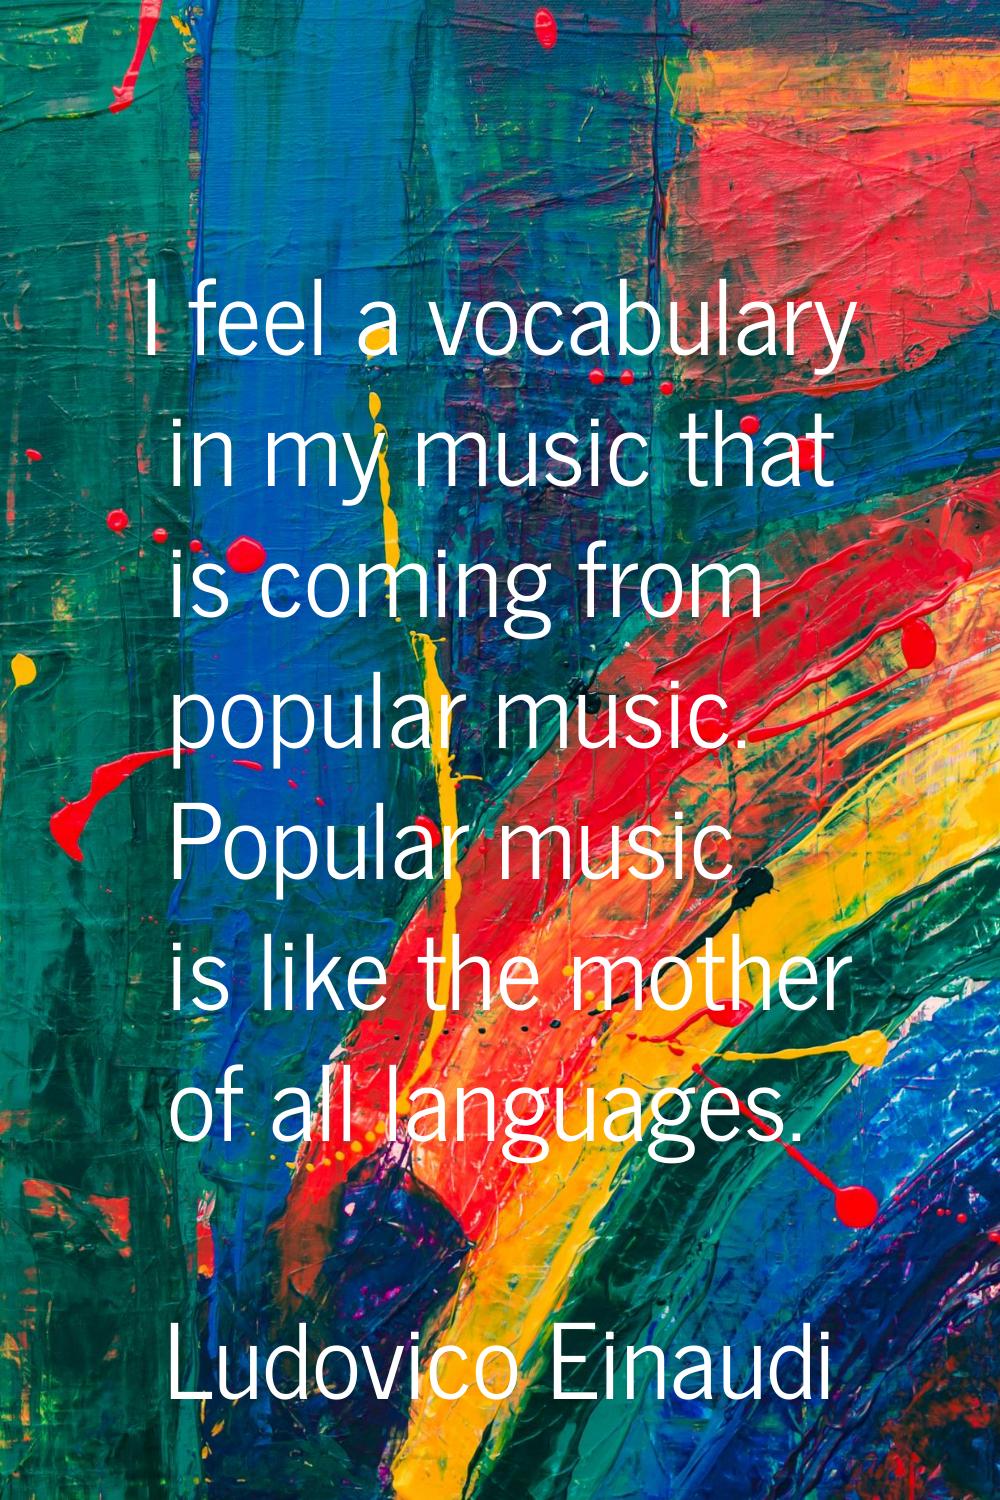 I feel a vocabulary in my music that is coming from popular music. Popular music is like the mother